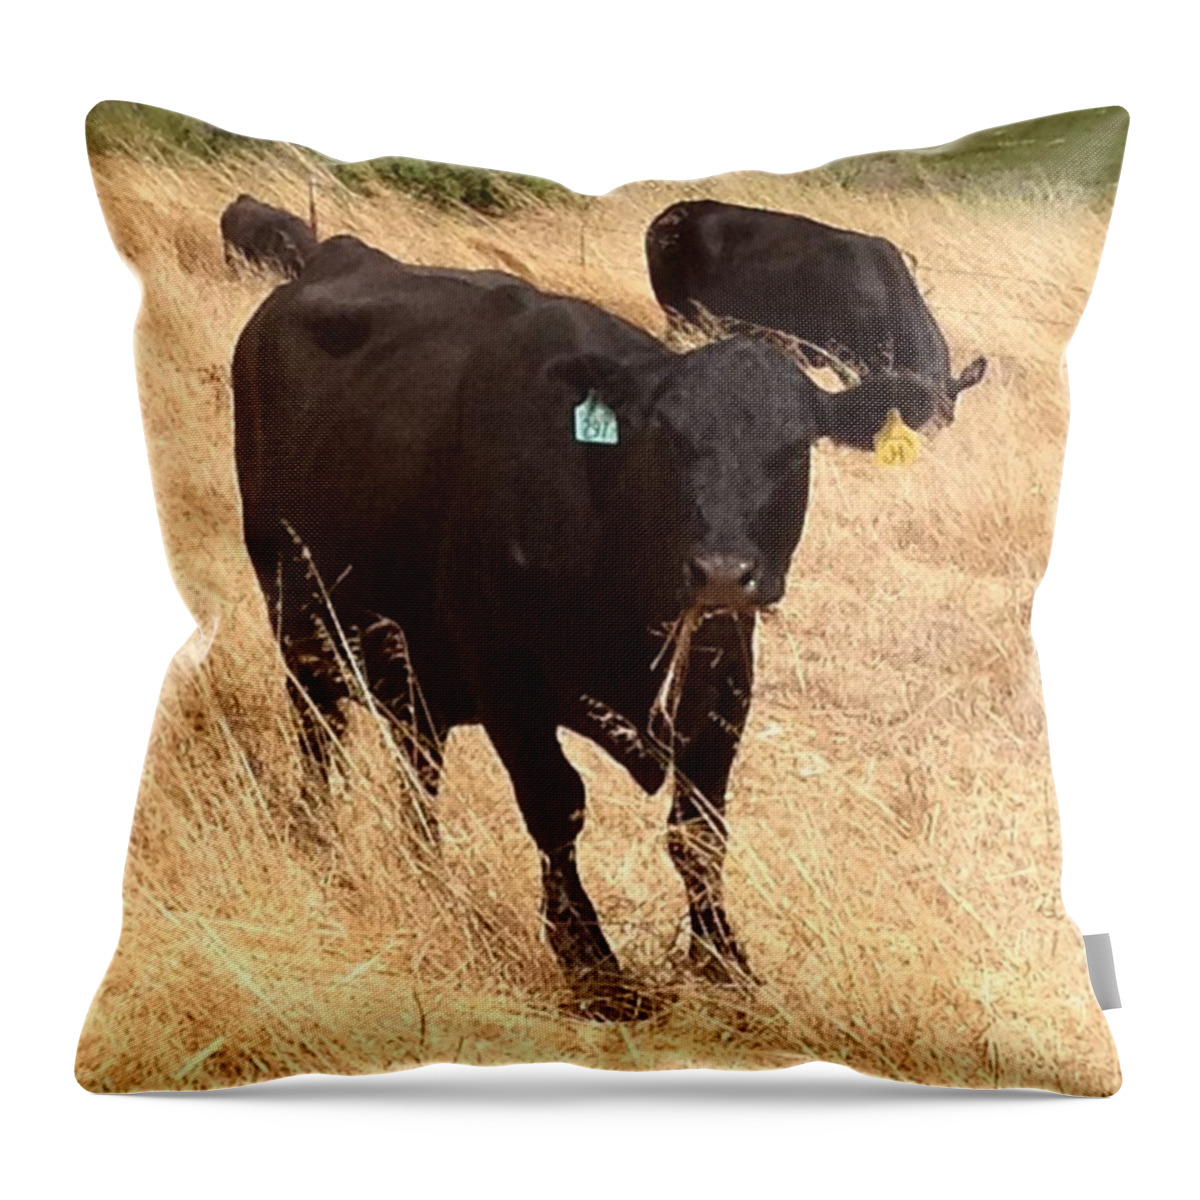 Nofilter Throw Pillow featuring the photograph Cows by Nancy Ingersoll